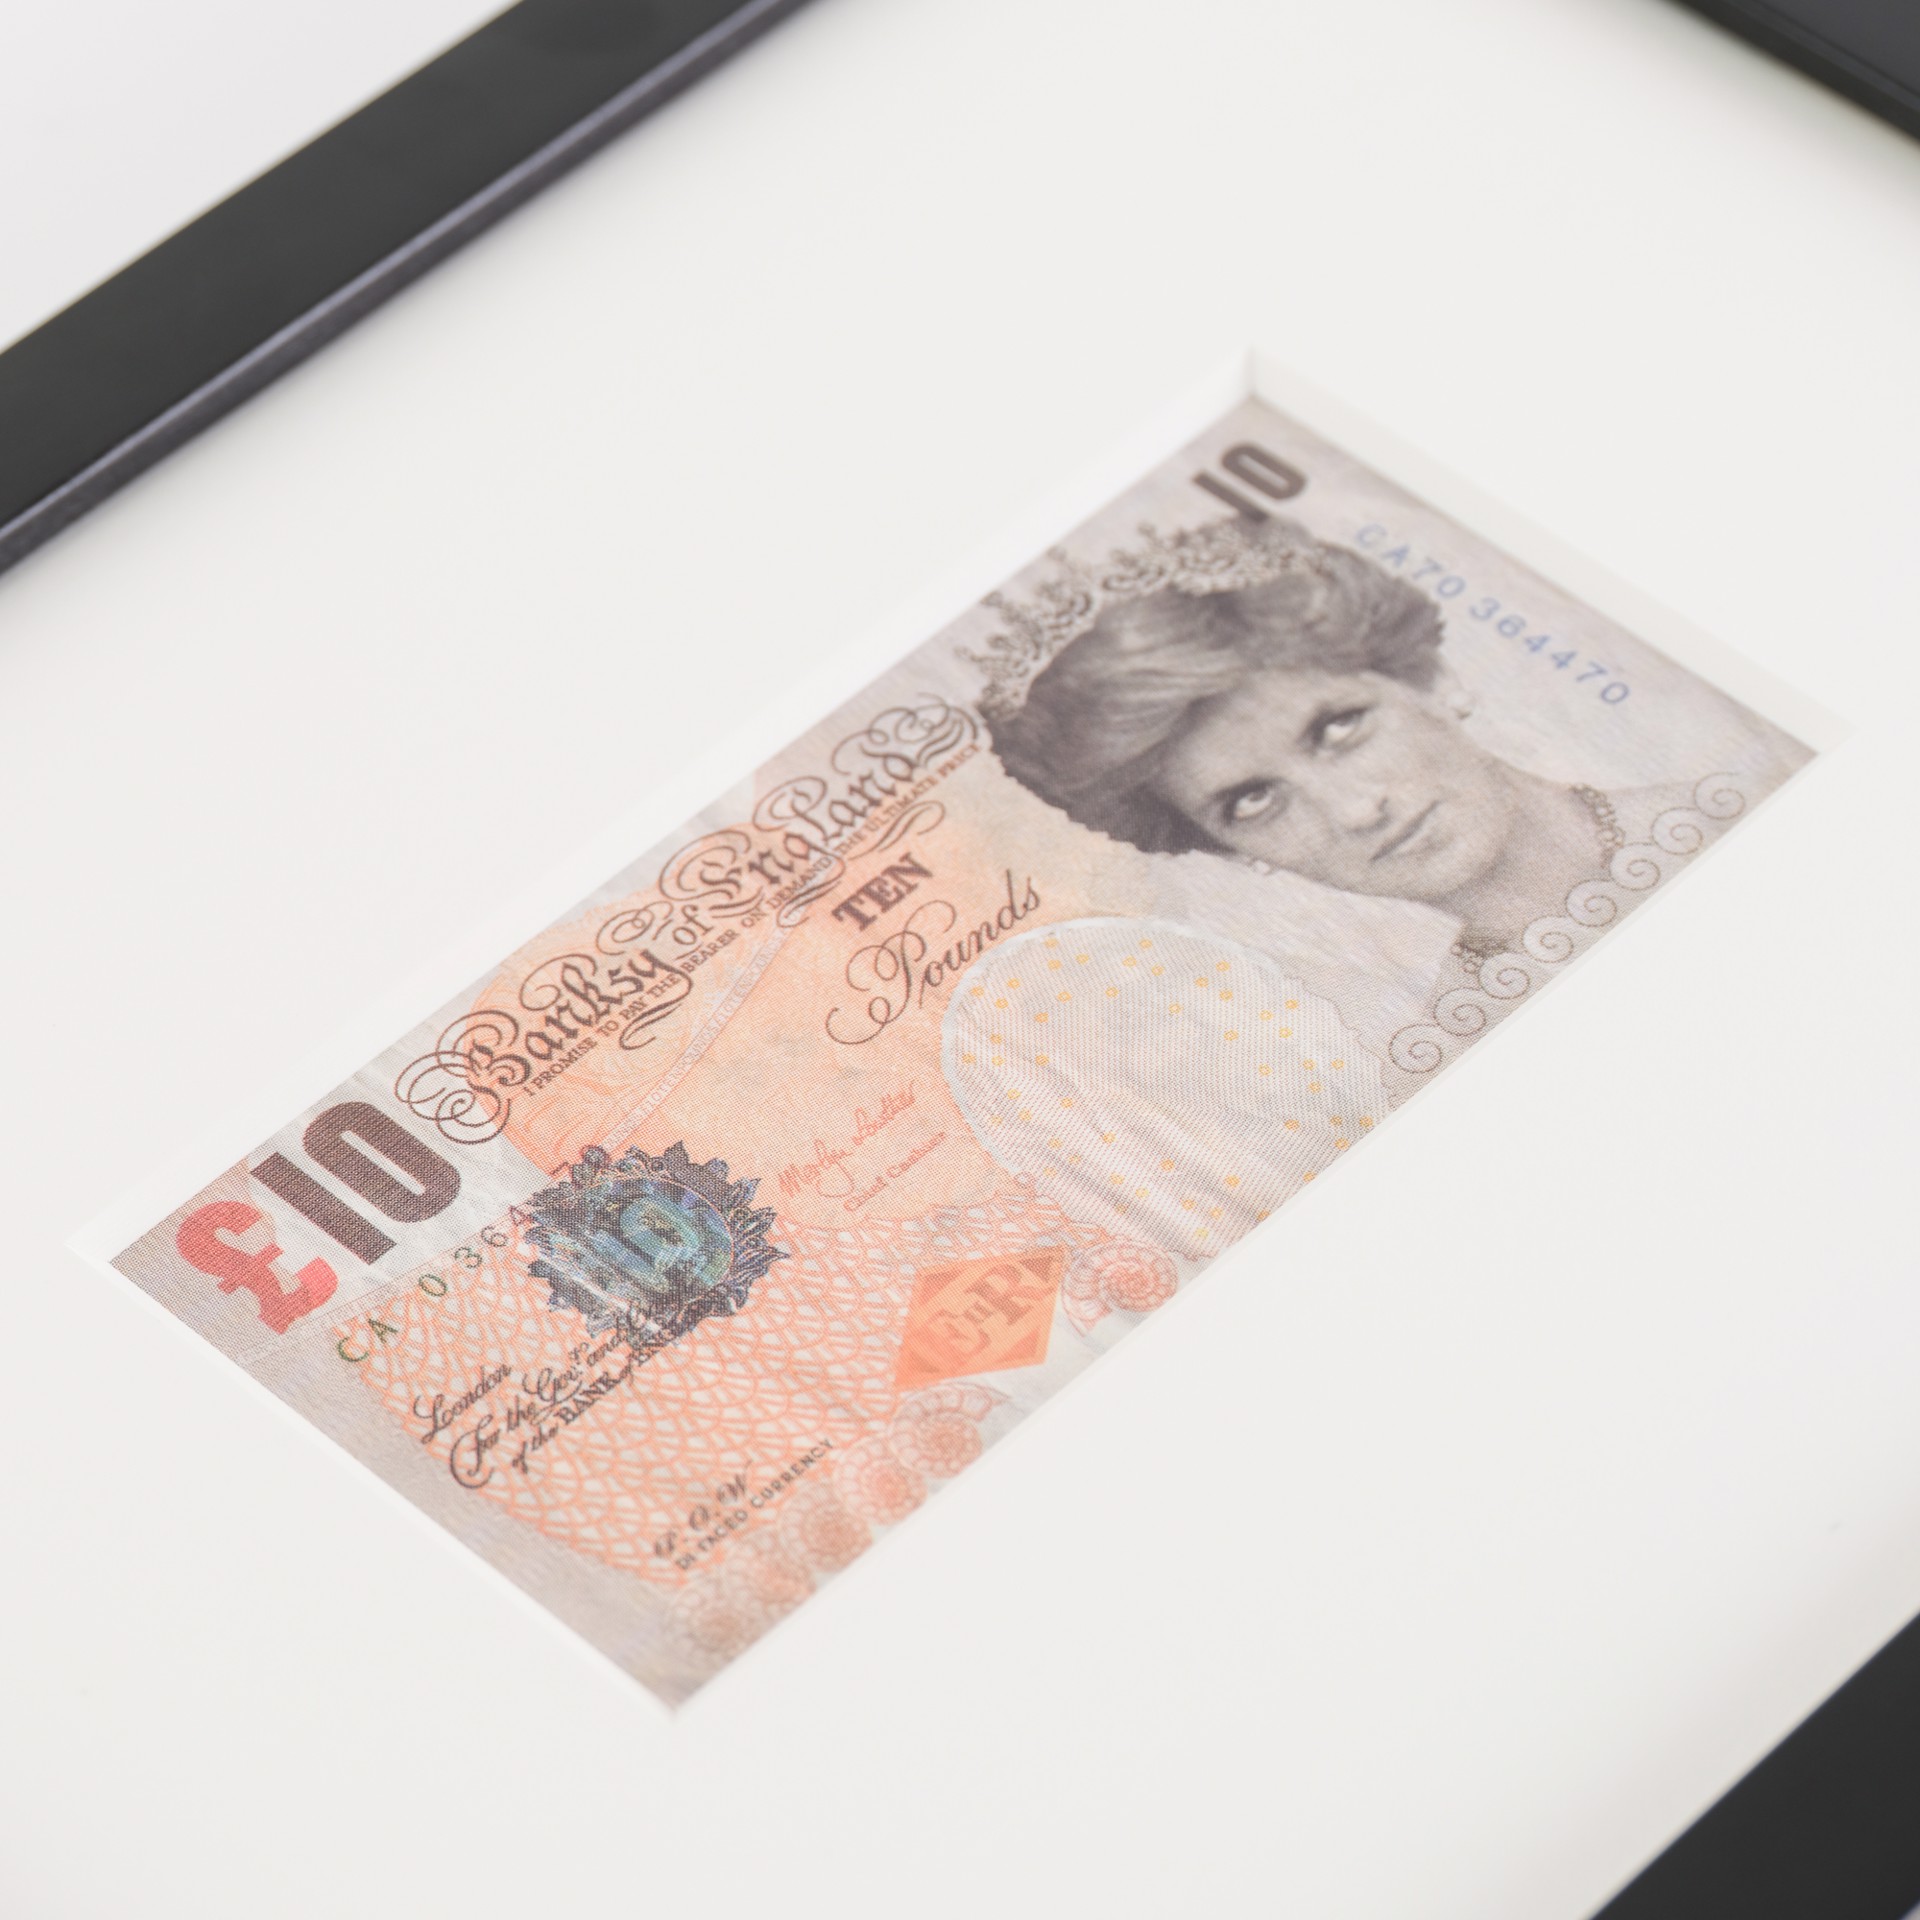 Di-Faced Tenner by Banksy